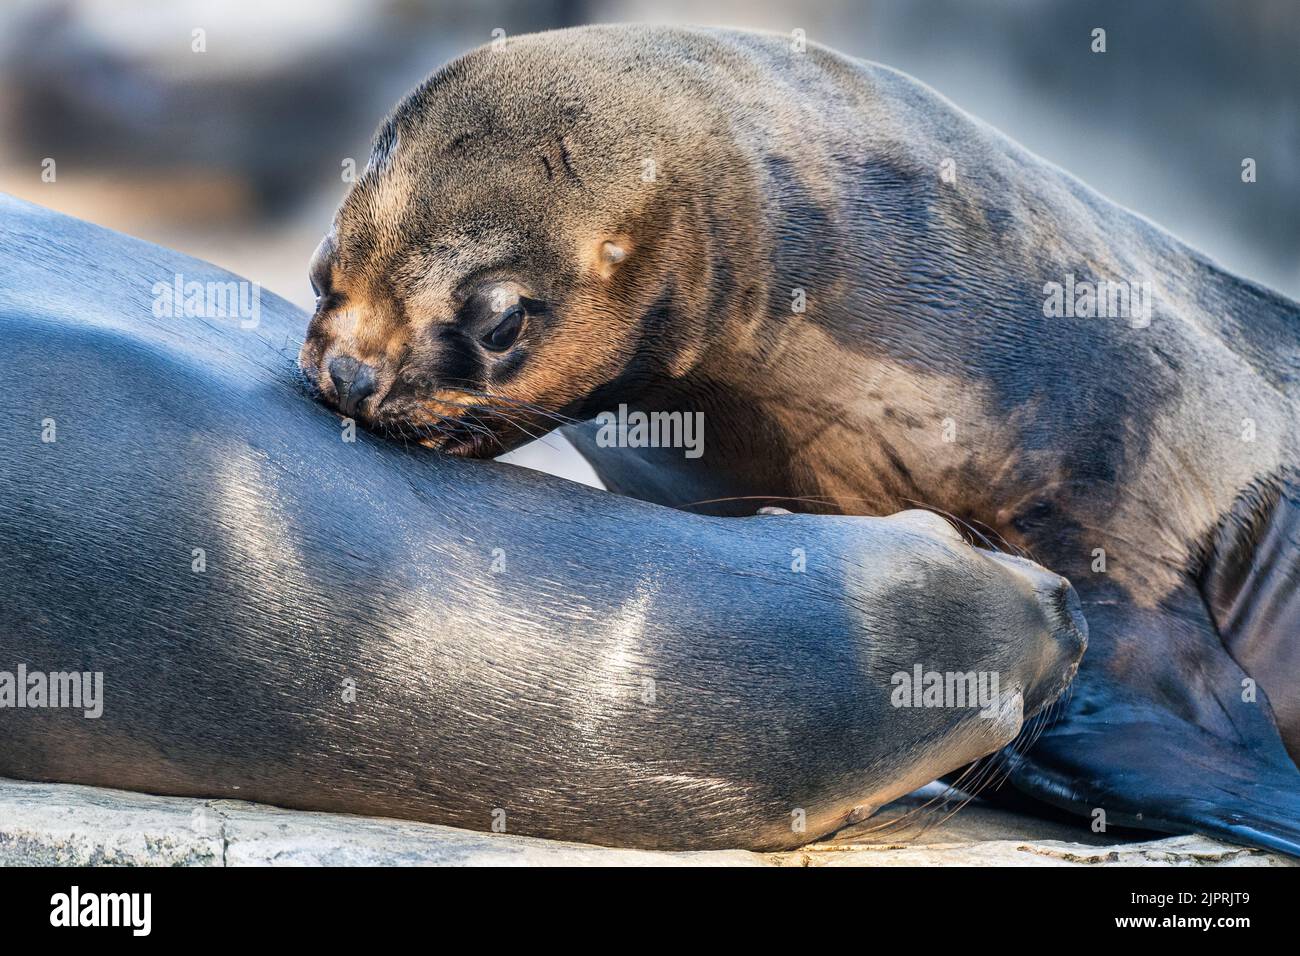 Two South American Sea Lions hugging and sniffing each other in yin-yang like position in the Tiergarten Schönbrunn Zoo in Vienna, Austria. Stock Photo